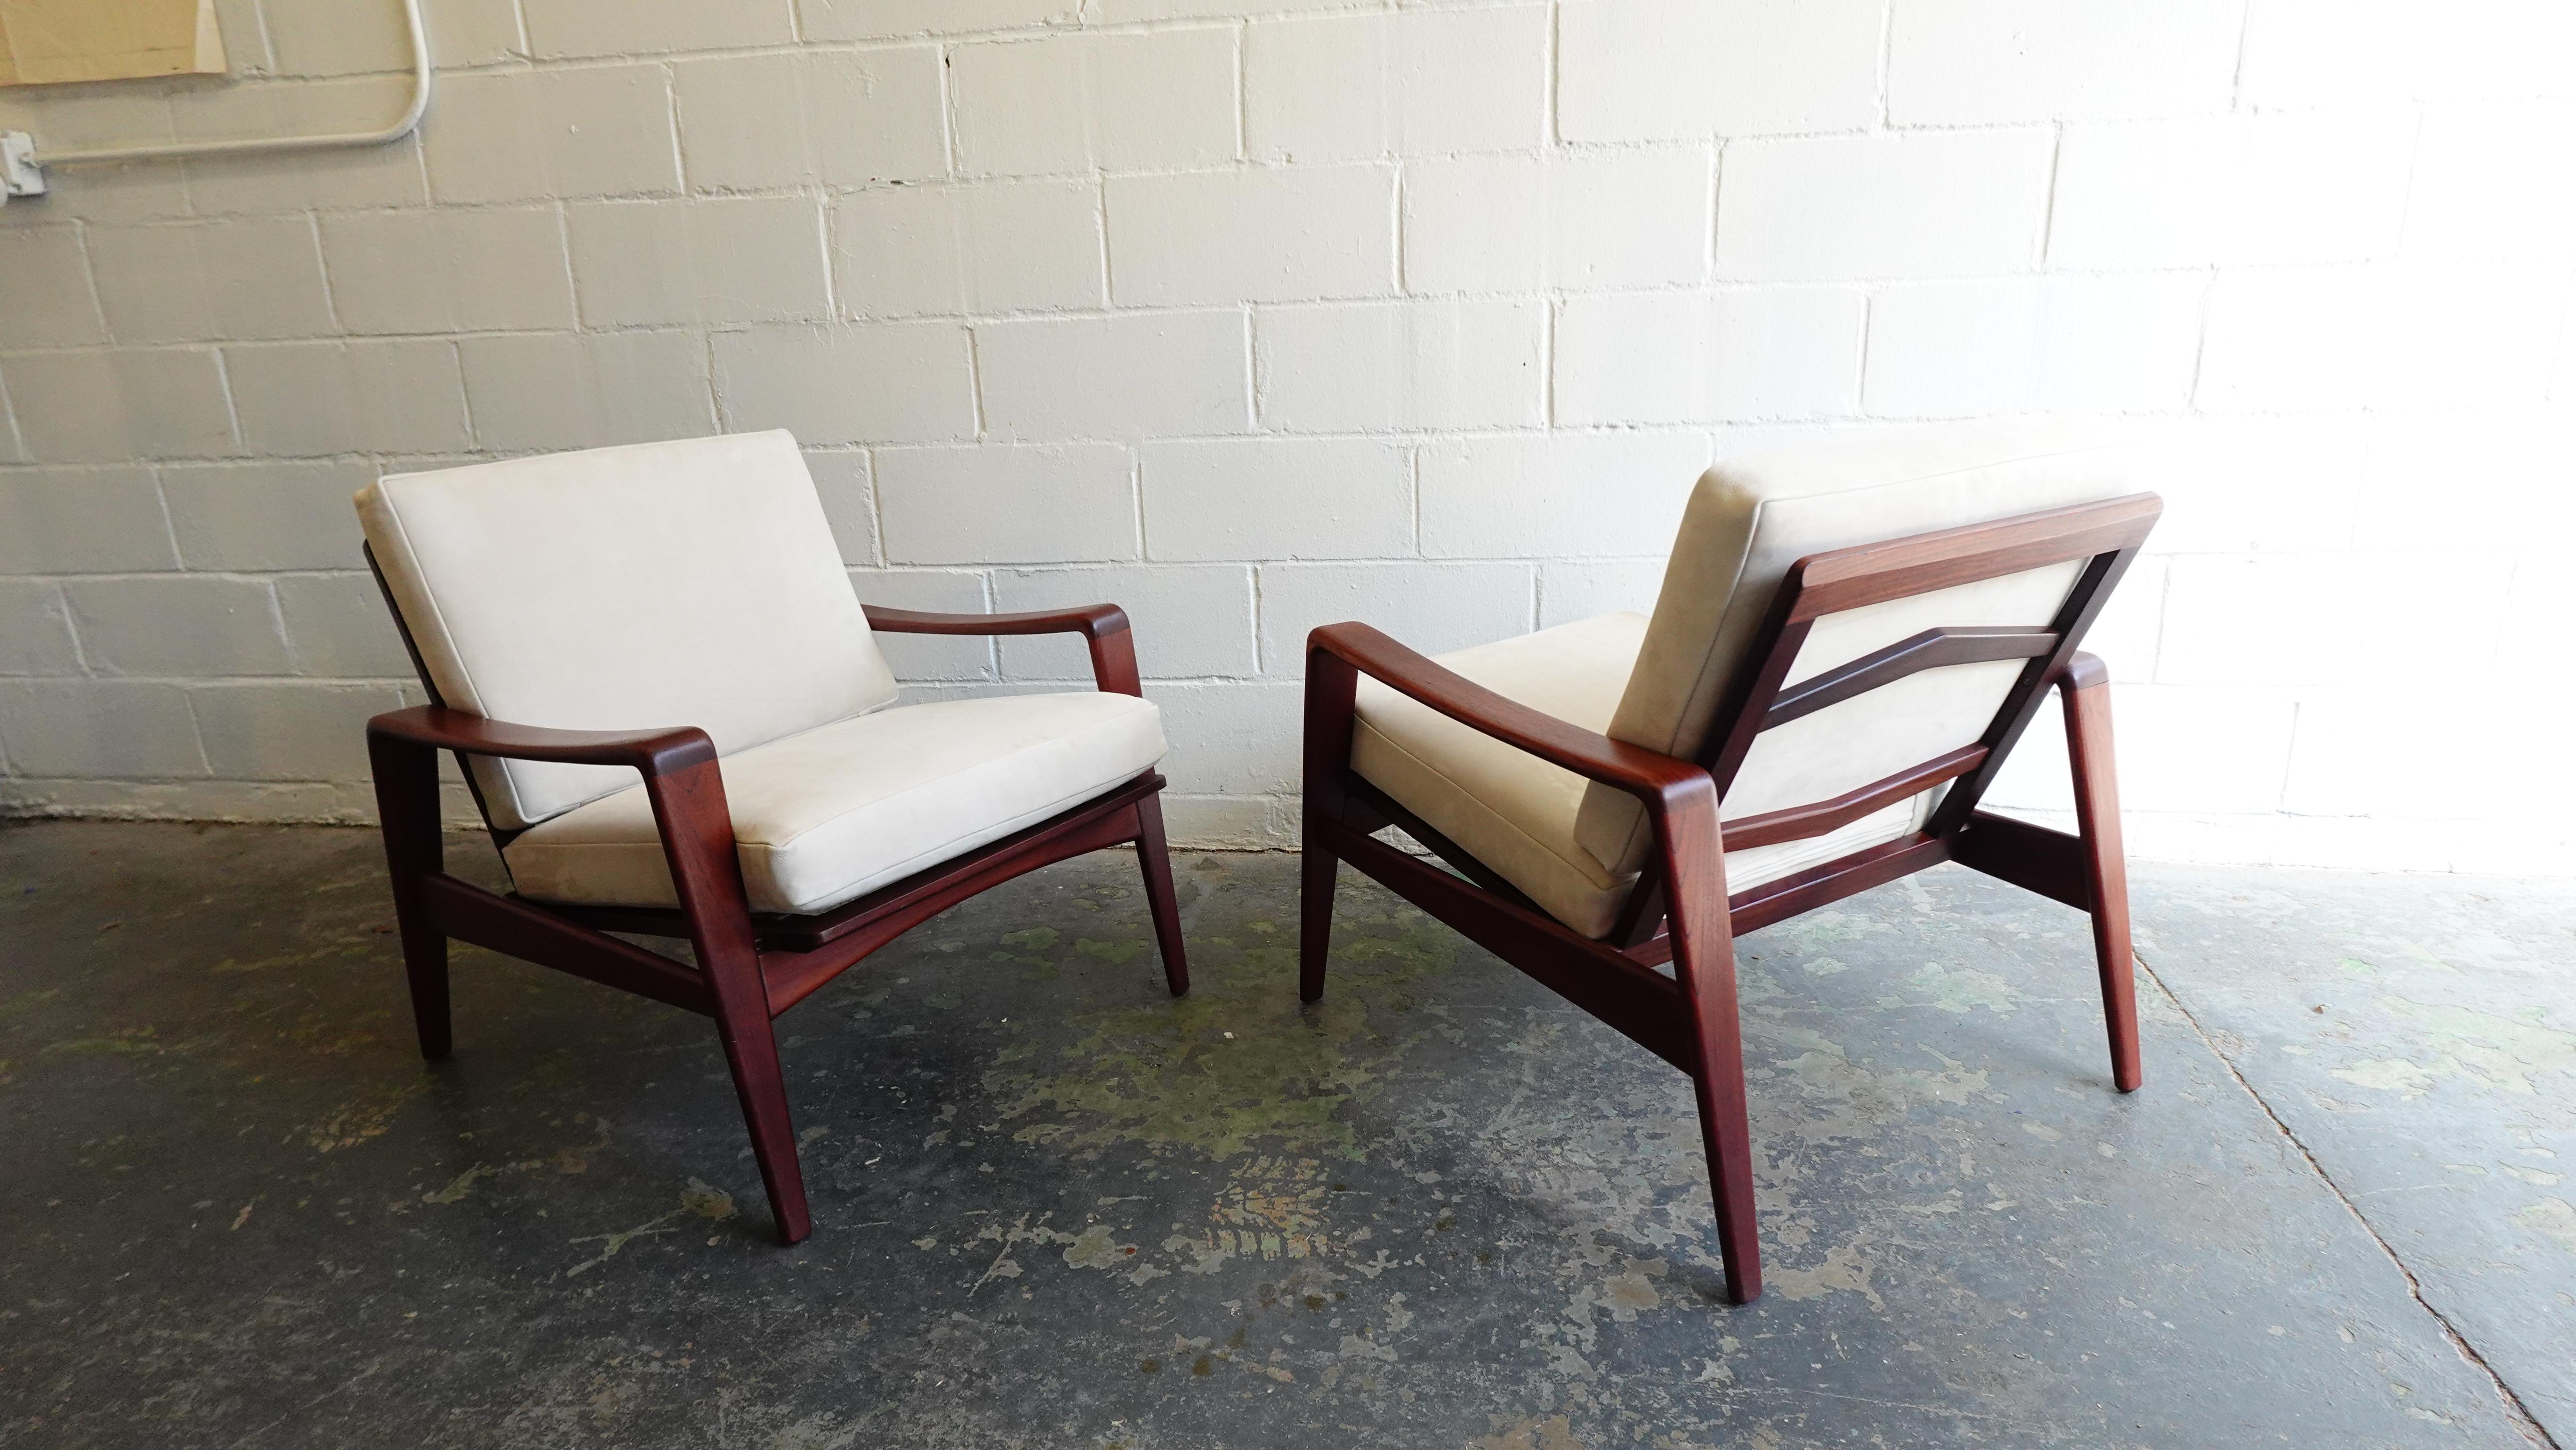 Pair of Arne Wahl Iverson Lounge Chairs for Komfort in Teak & Leather, 1960 For Sale 5